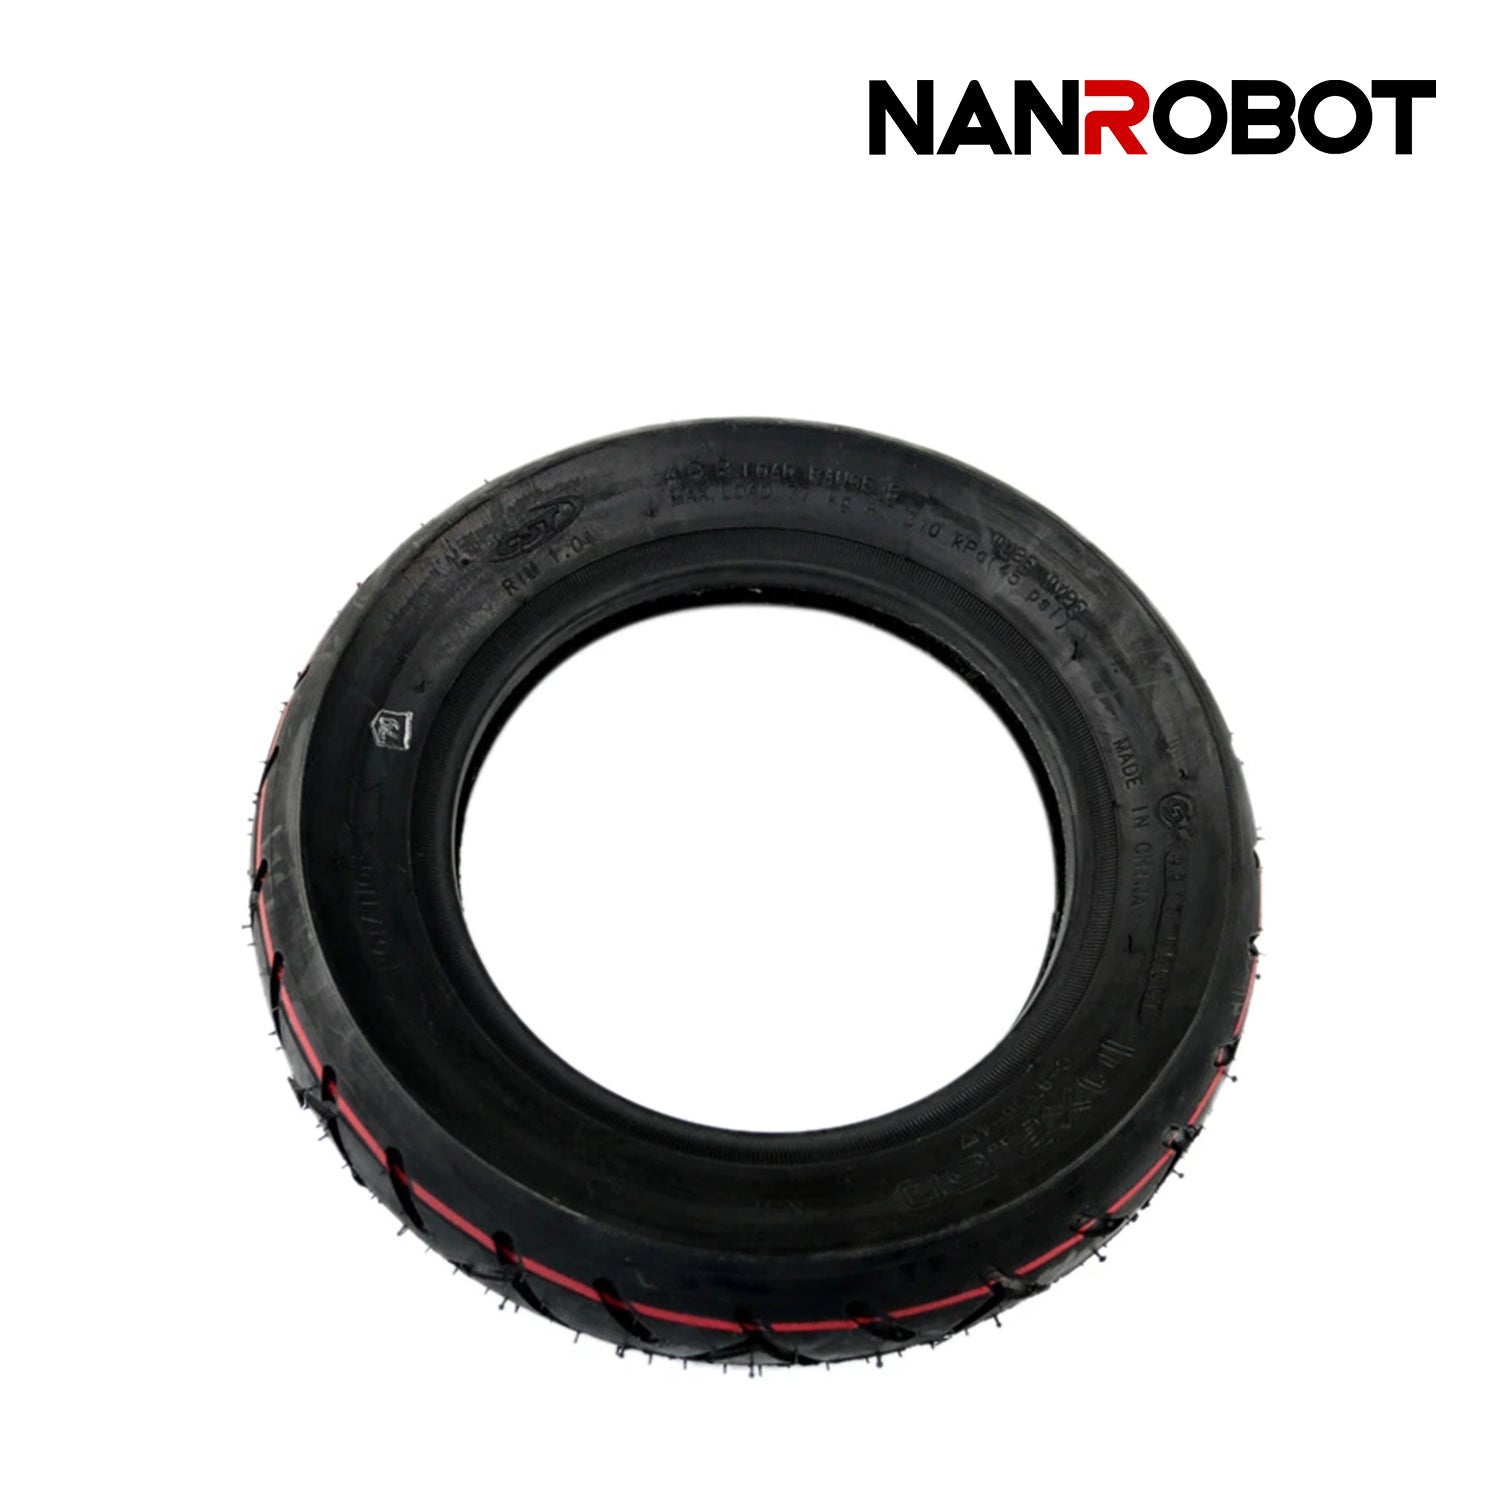 10x2.5 solid / solid tire -- 255x80 for Ninebot Max or similar - model Type  1